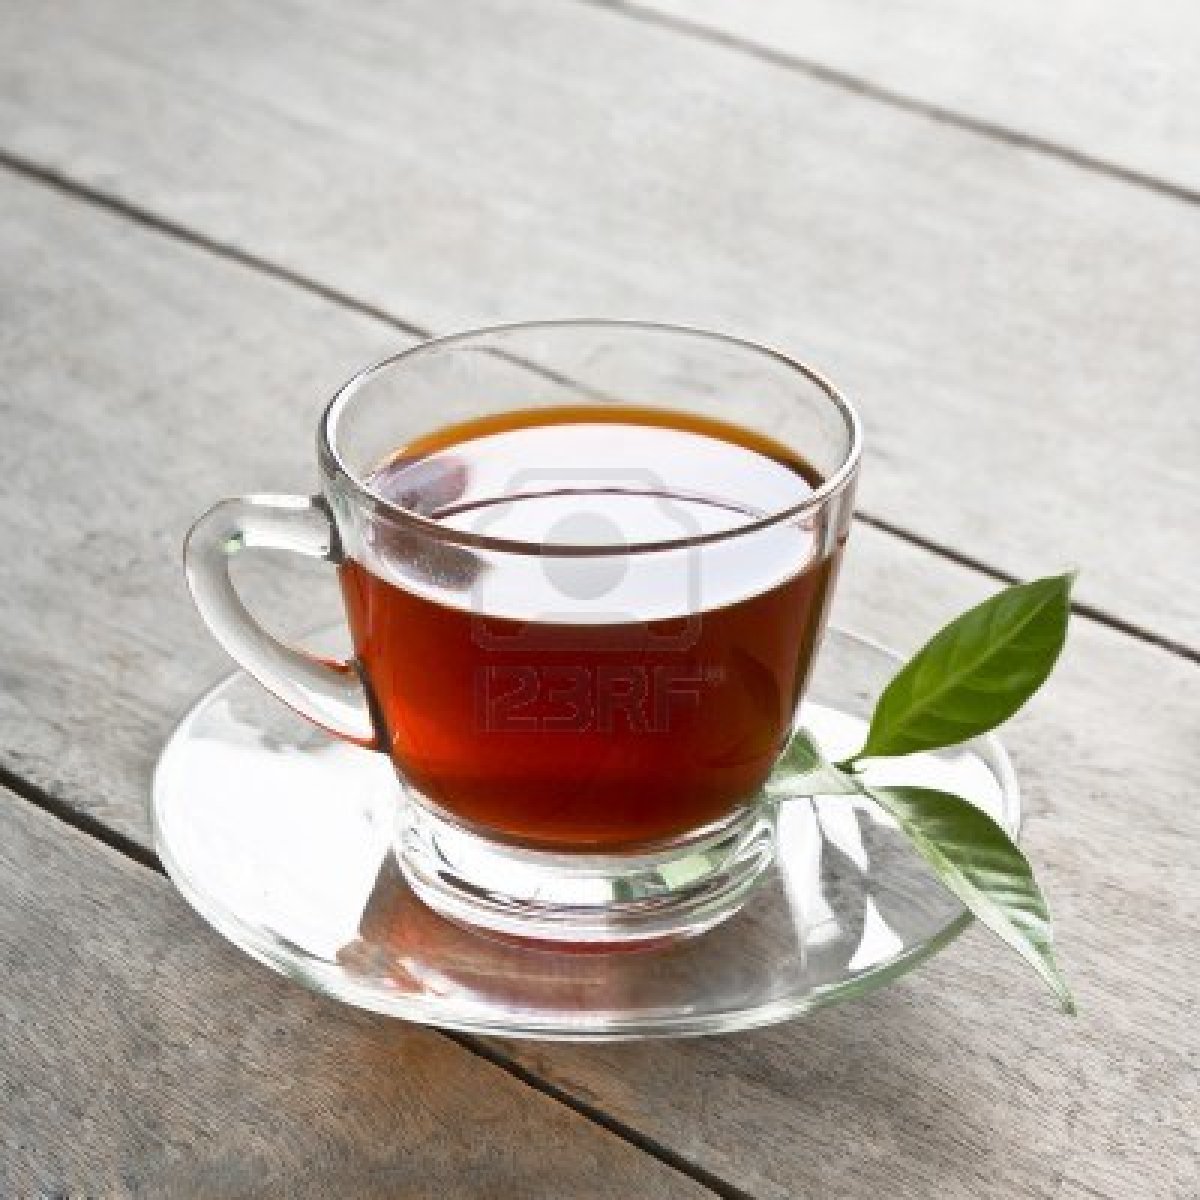 15548950-a-cup-of-tea-on-wood-board-drink-for-health